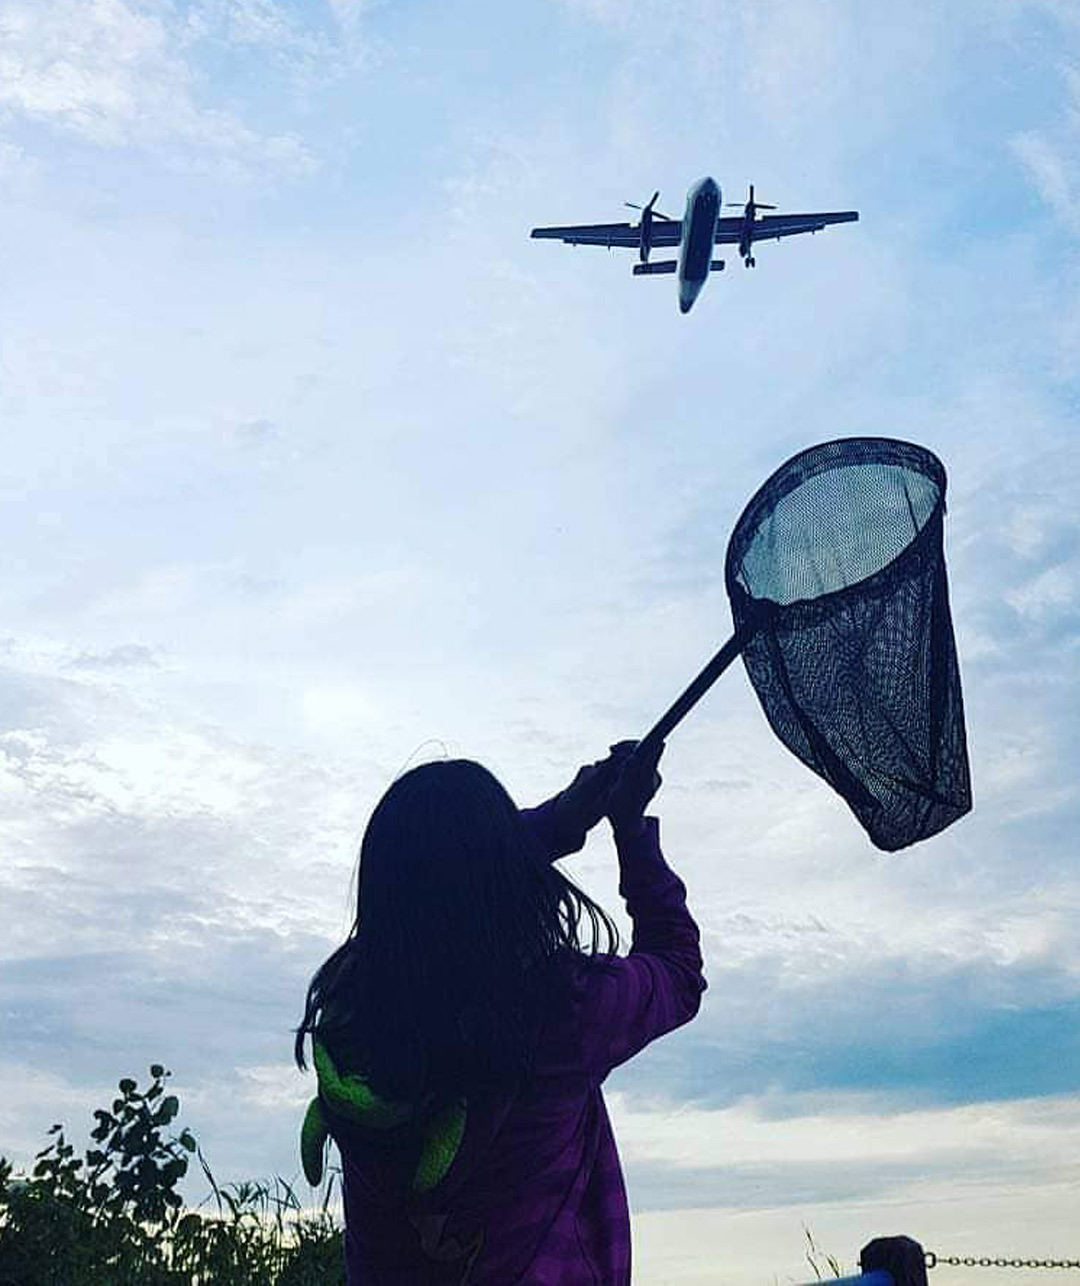 Little girl reaching her butterfly net up to an airplane in the sky